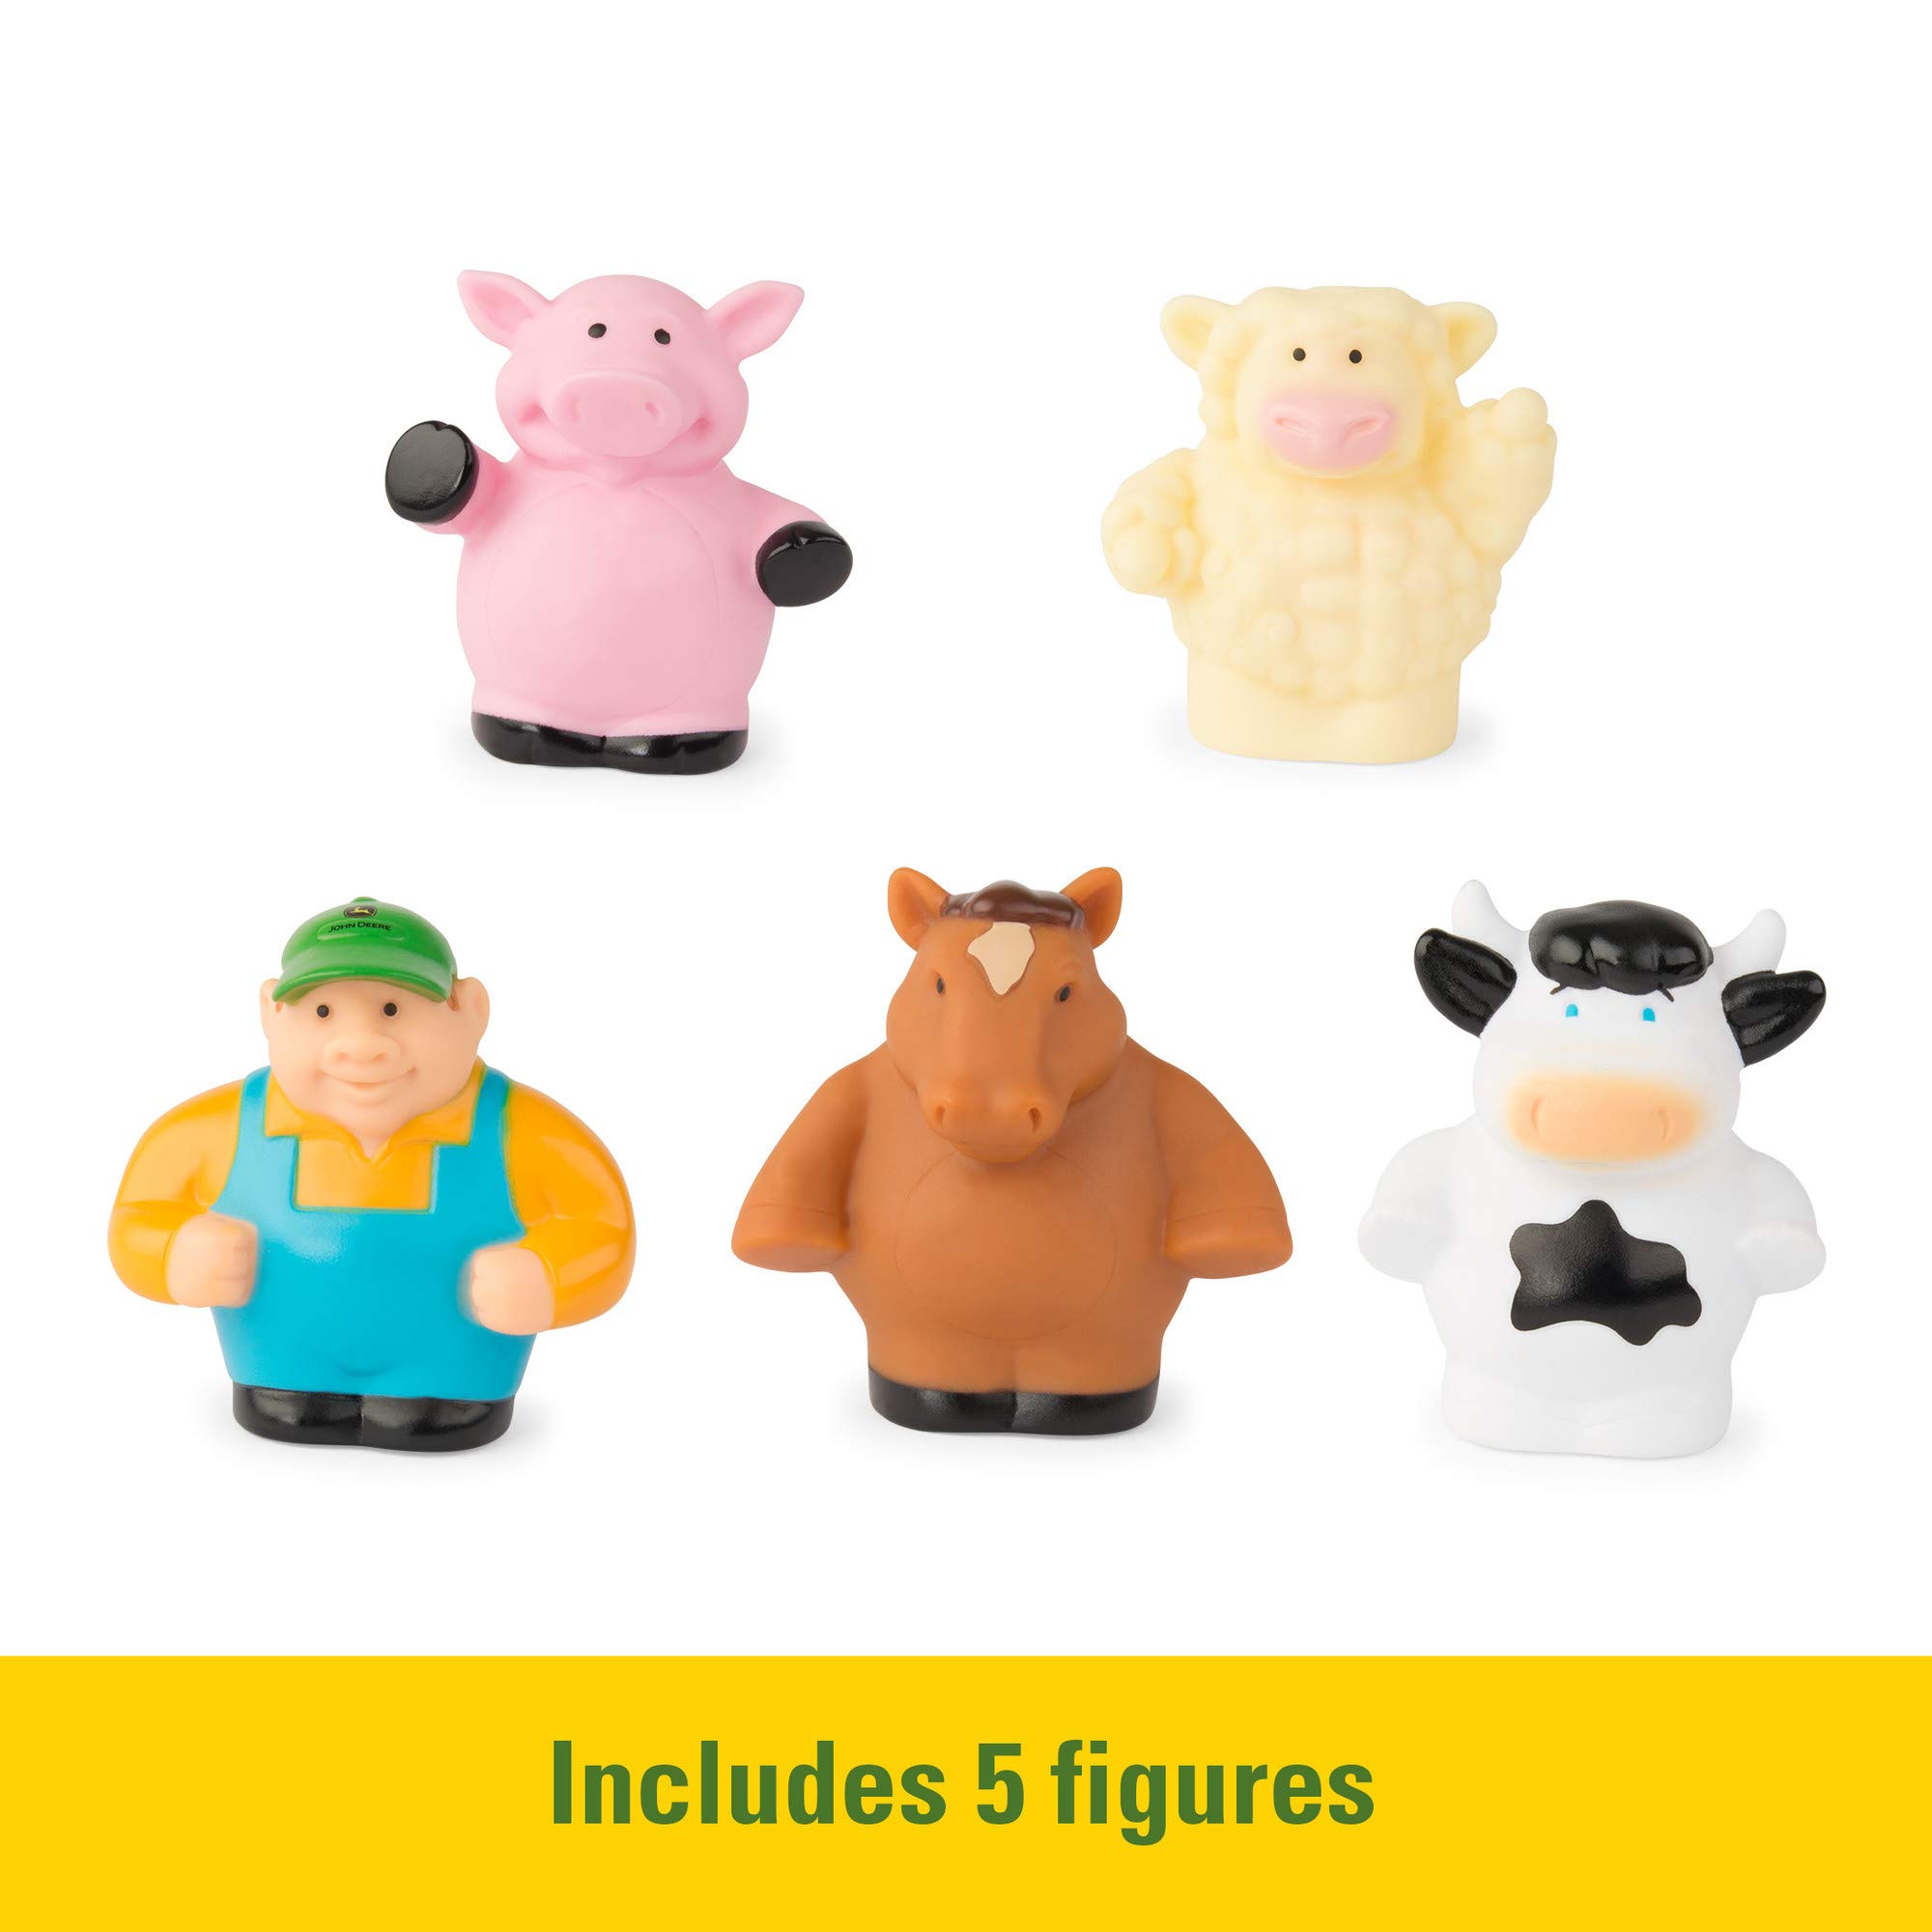 John Deere Animal Sounds Hayride Musical Tractor, Toddler Toys— Includes Farmer Figure, Tractor, and 4 Farm Animals-Girls and Boys Ages 12 Months and Up